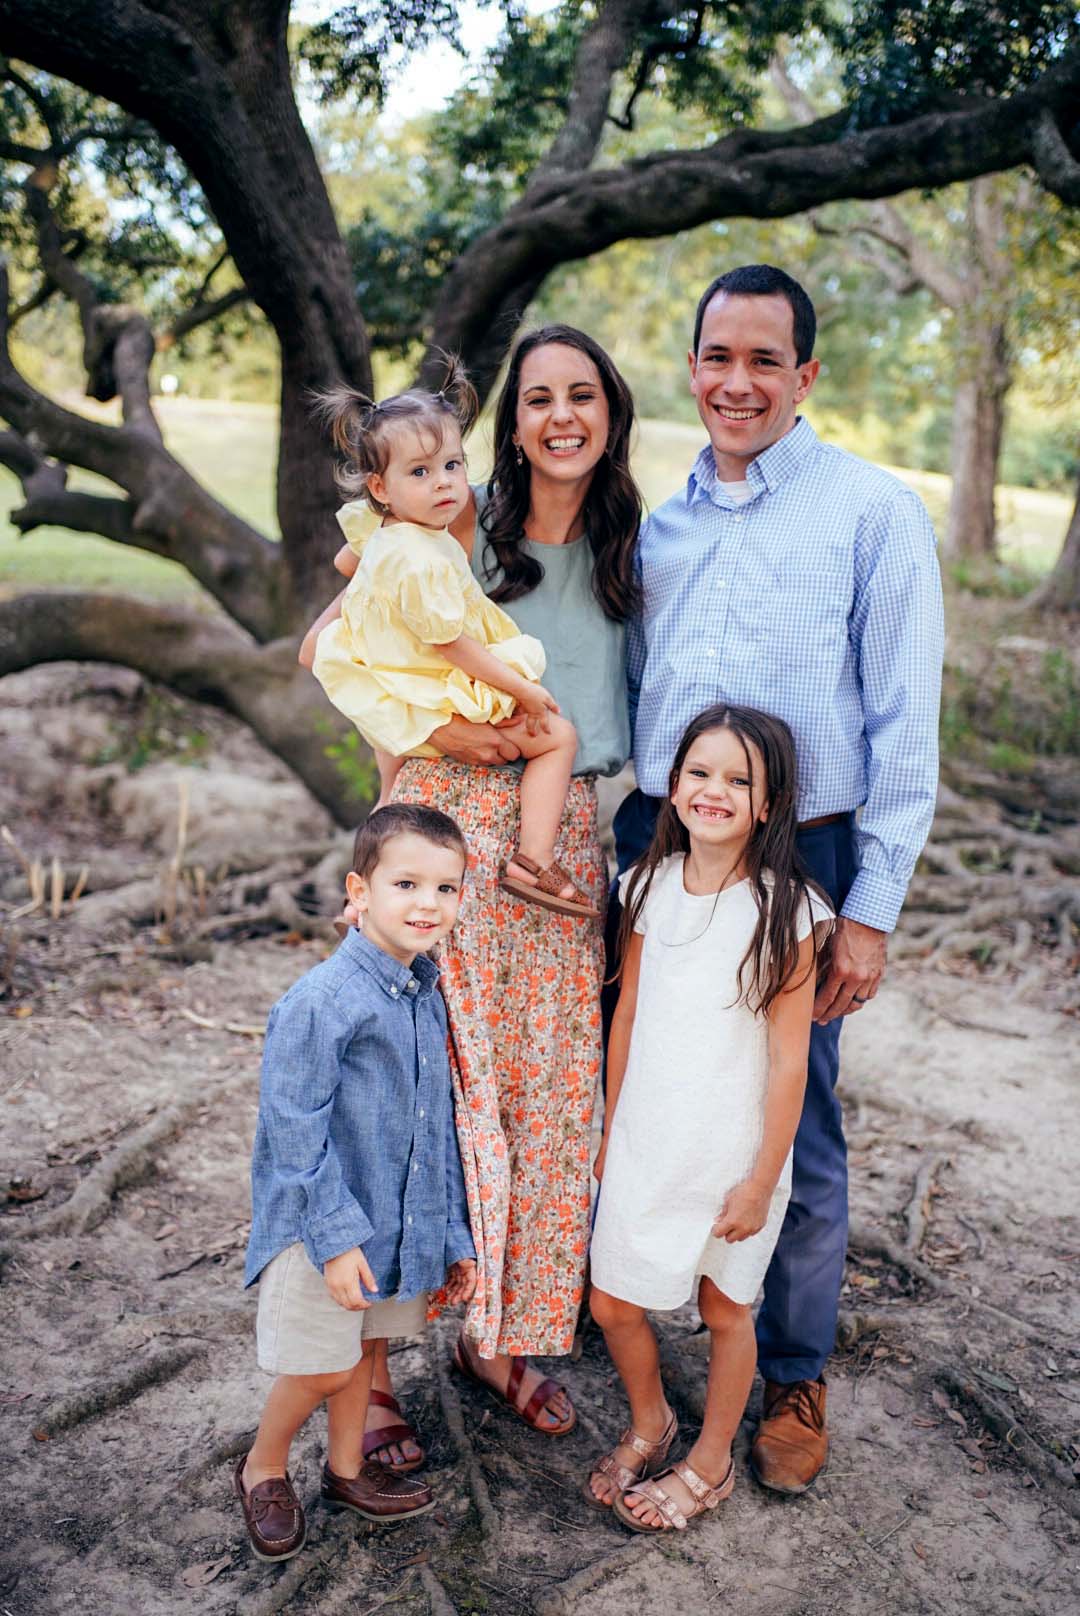 Stephanie Hilgert, RN, Marquette Method Instructor with her husband and family